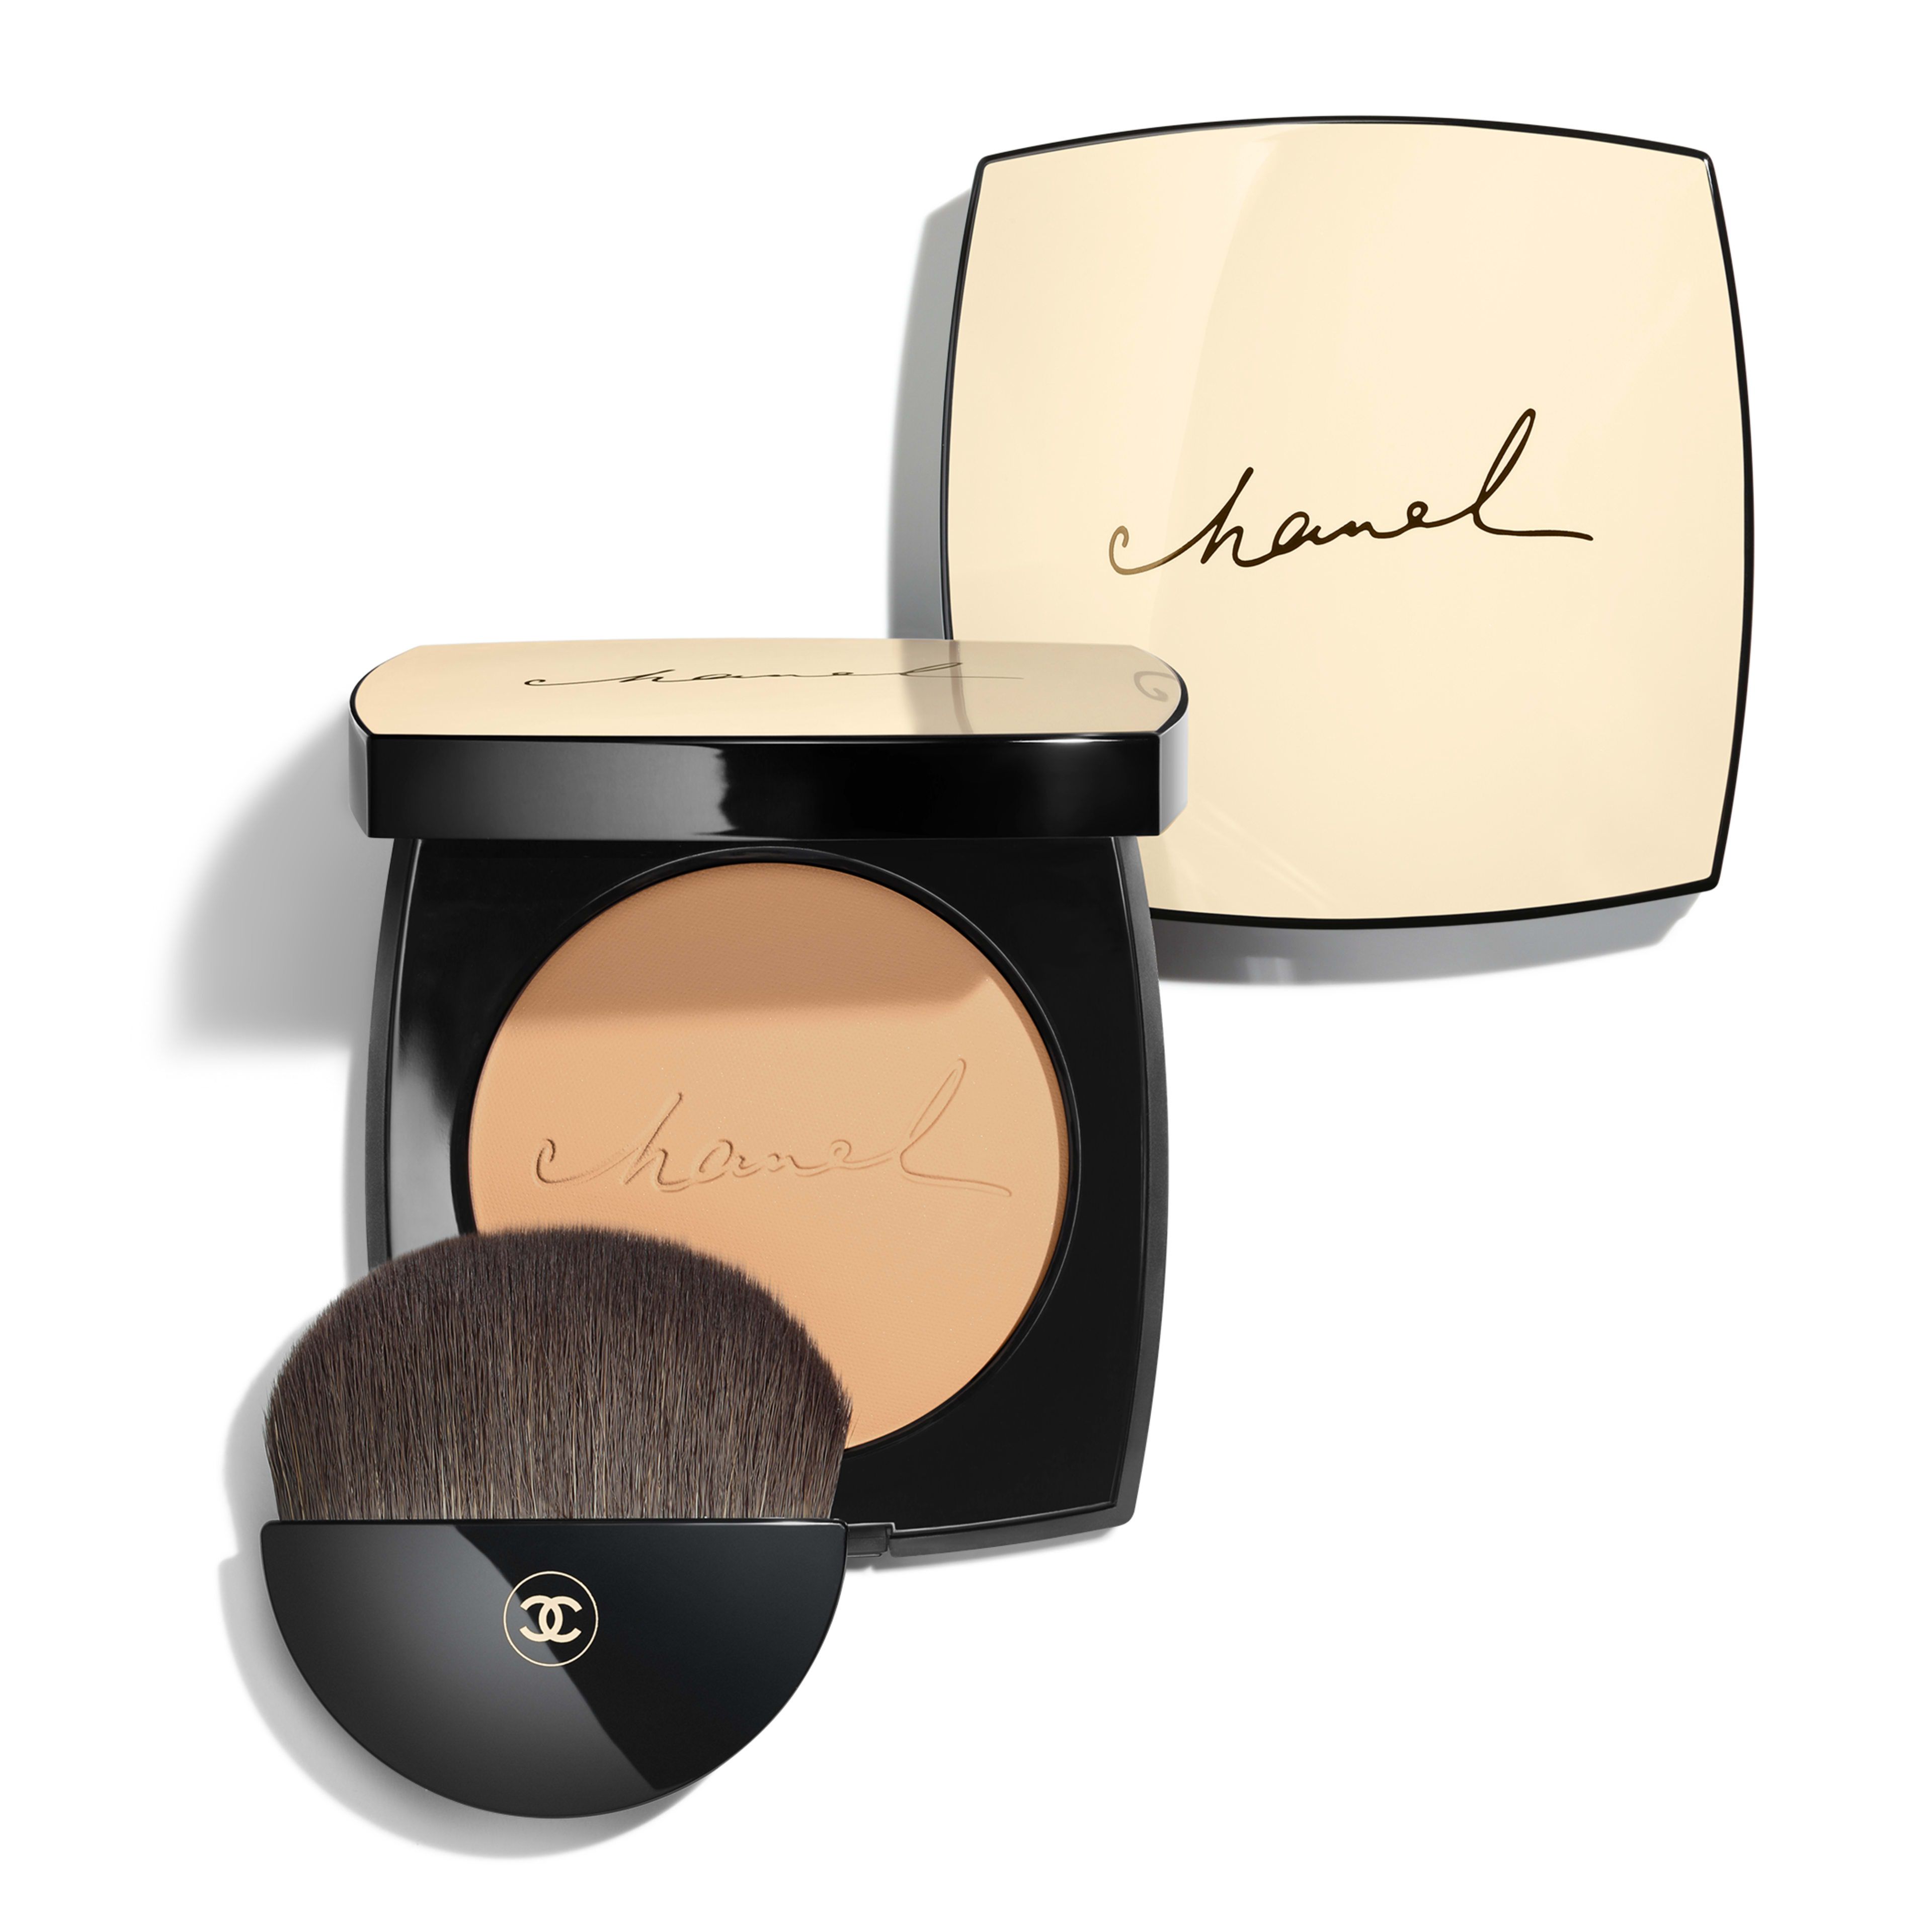 LES BEIGES Exclusive Creation Healthy Glow Sheer Powder N°30 | CHANEL | Chanel, Inc. (US)